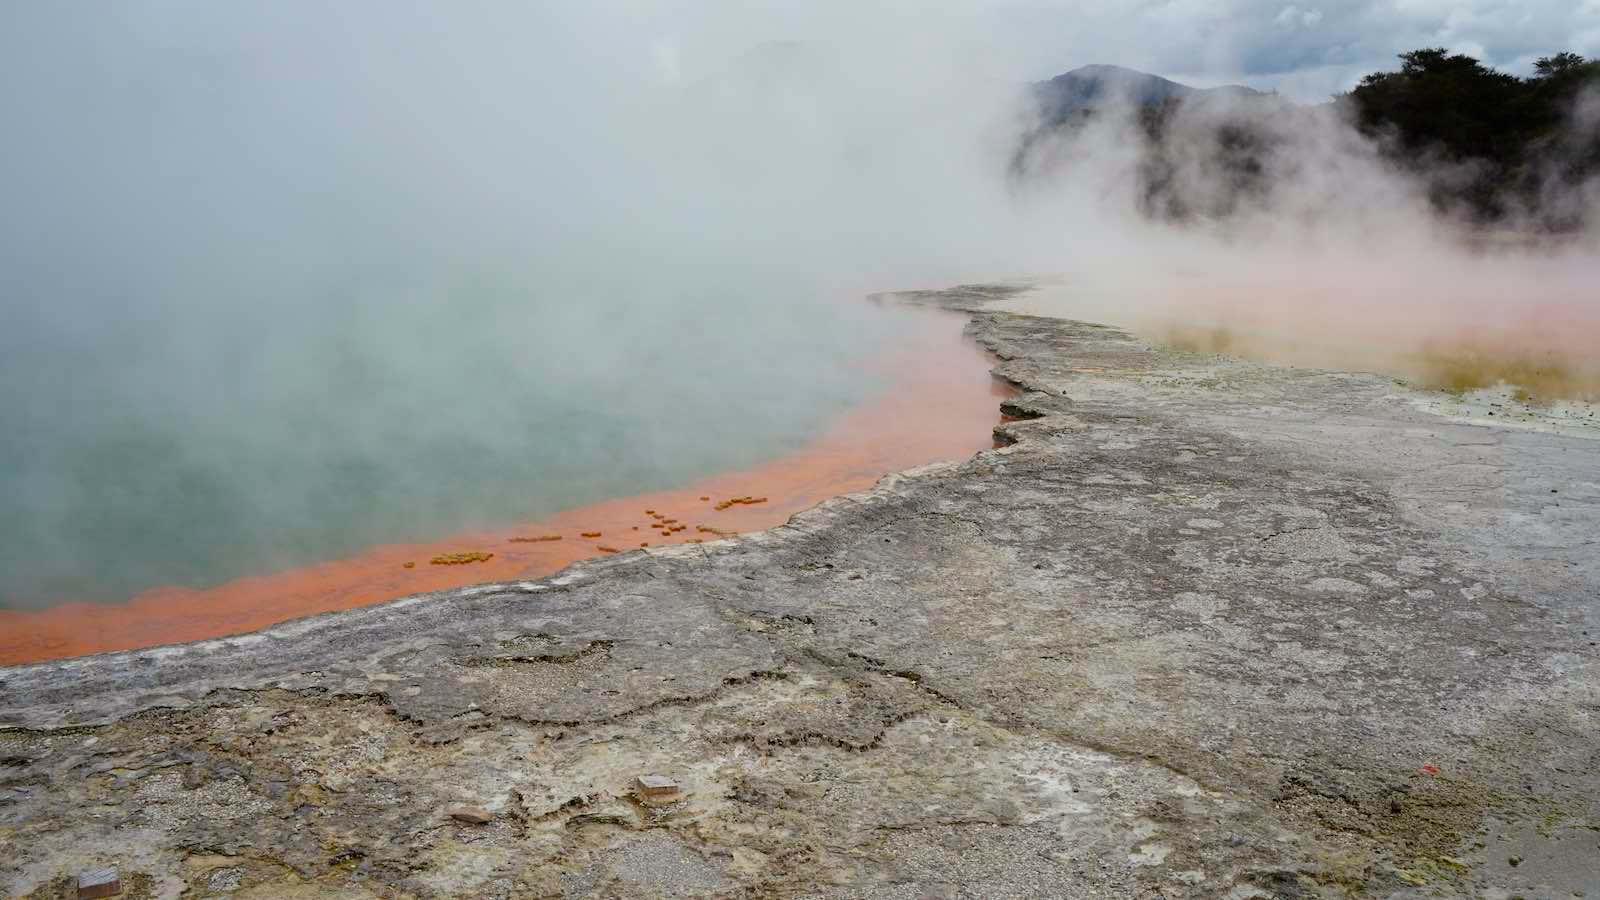 Colorful hot spring, although you probably wouldn't want to bathe in this, apparently the orange comes from an arsentic compound